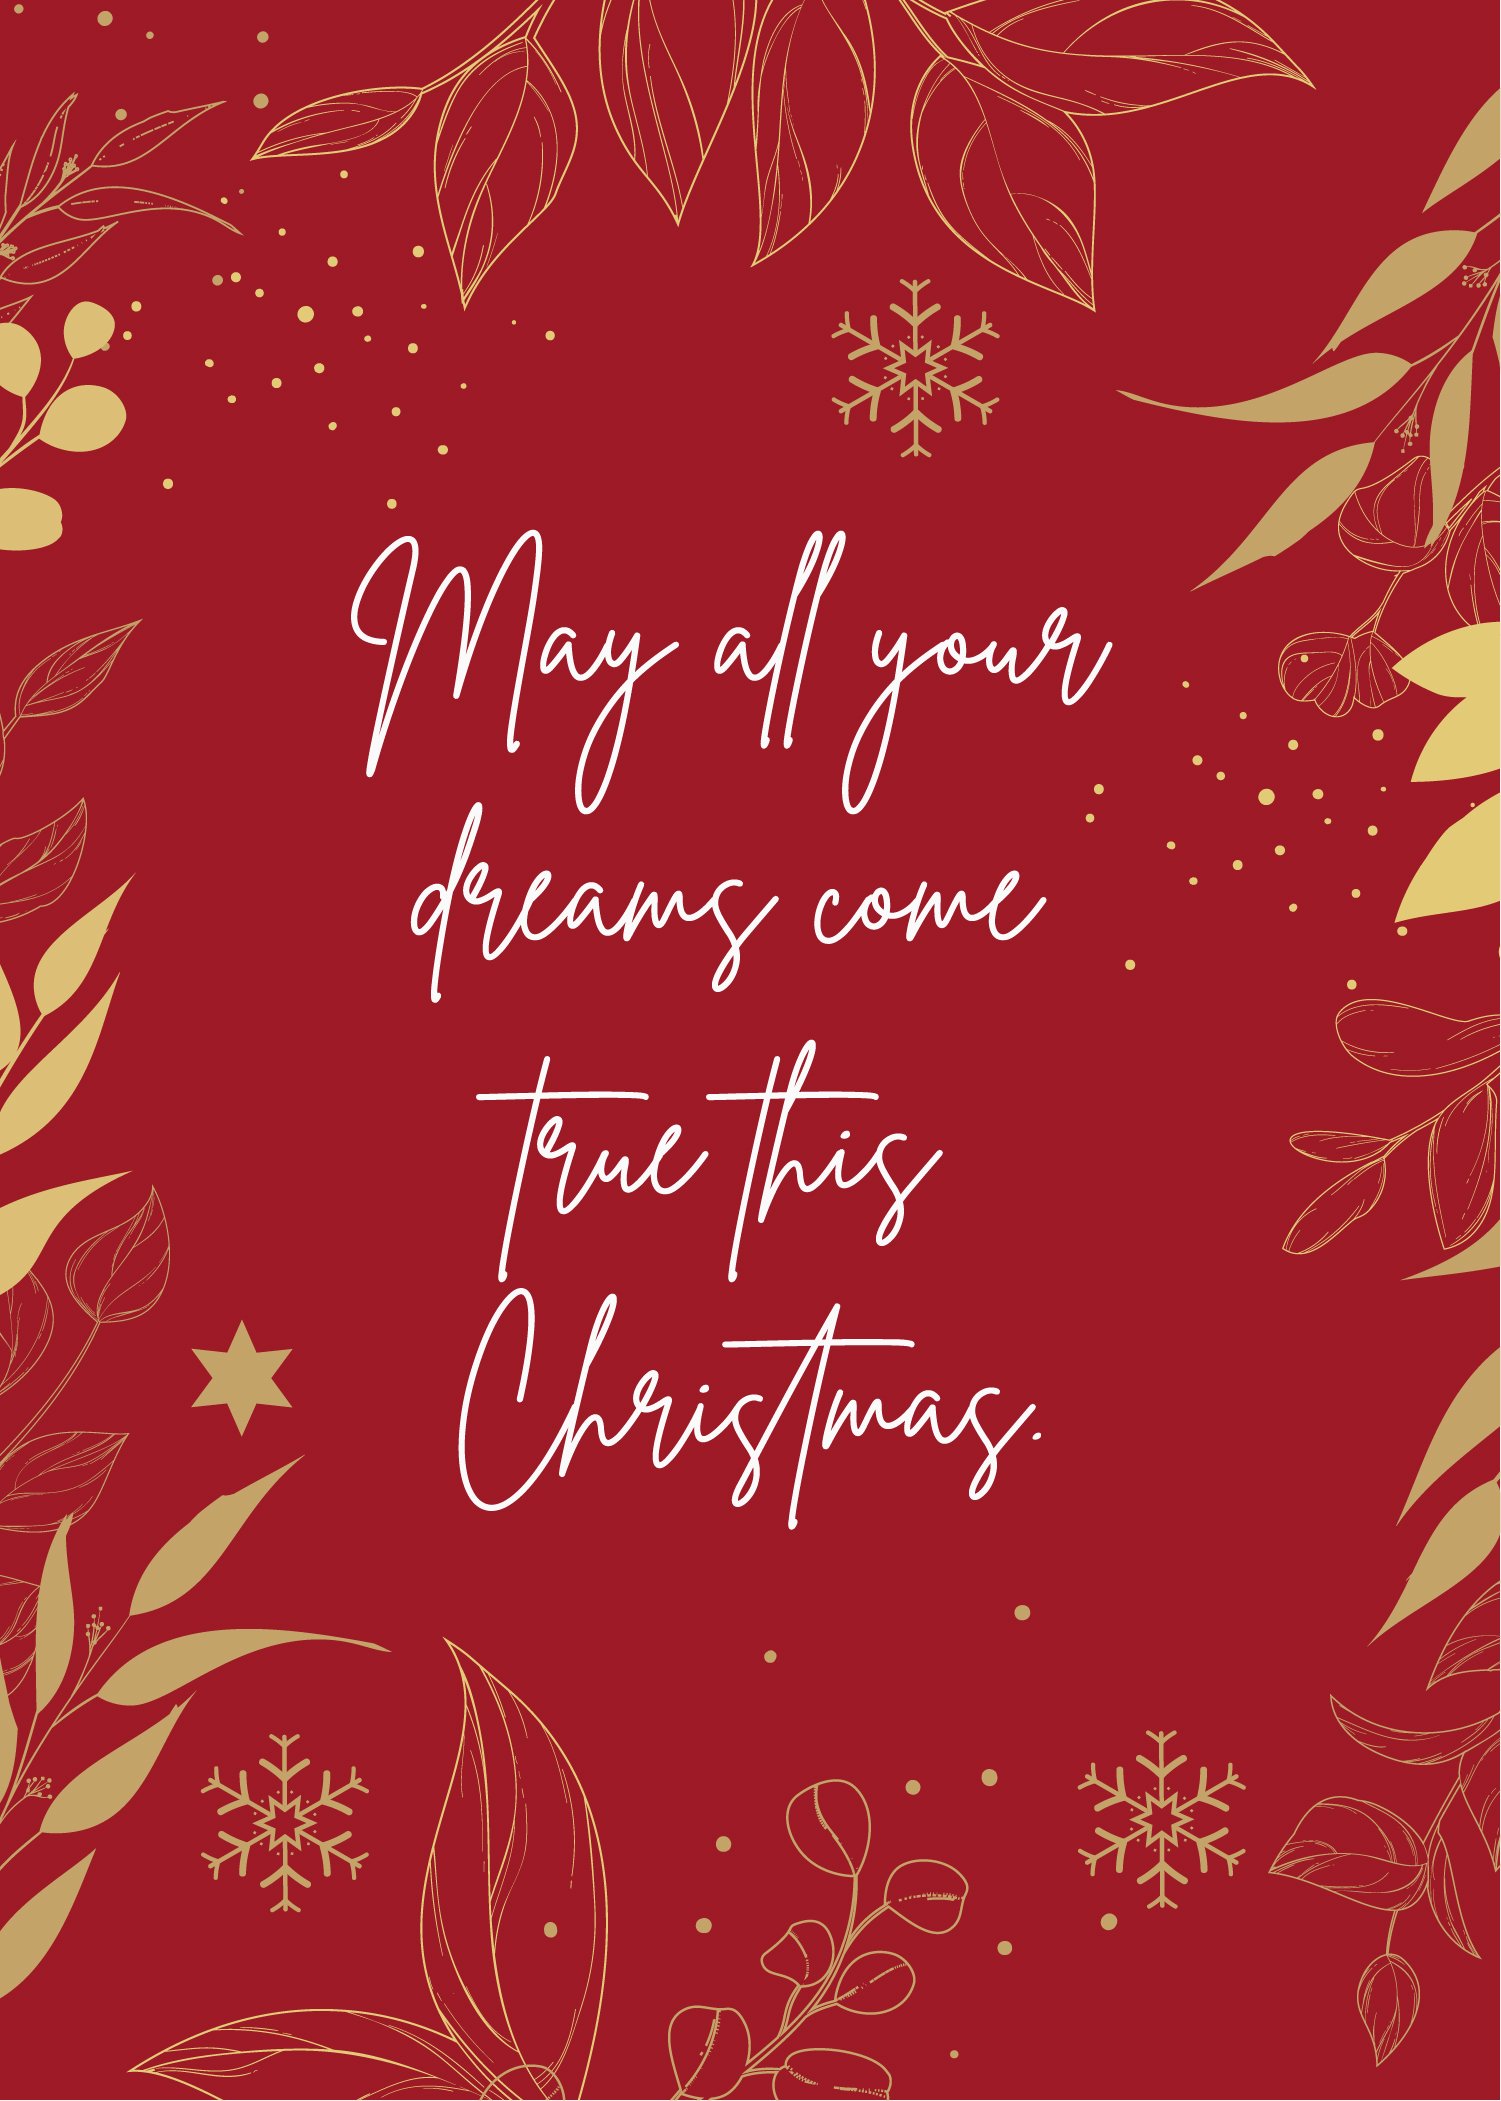 Free Christmas Day Wishes in Word, Google Docs, Illustrator, PSD, Apple Pages, Publisher, EPS, SVG, JPG, PNG